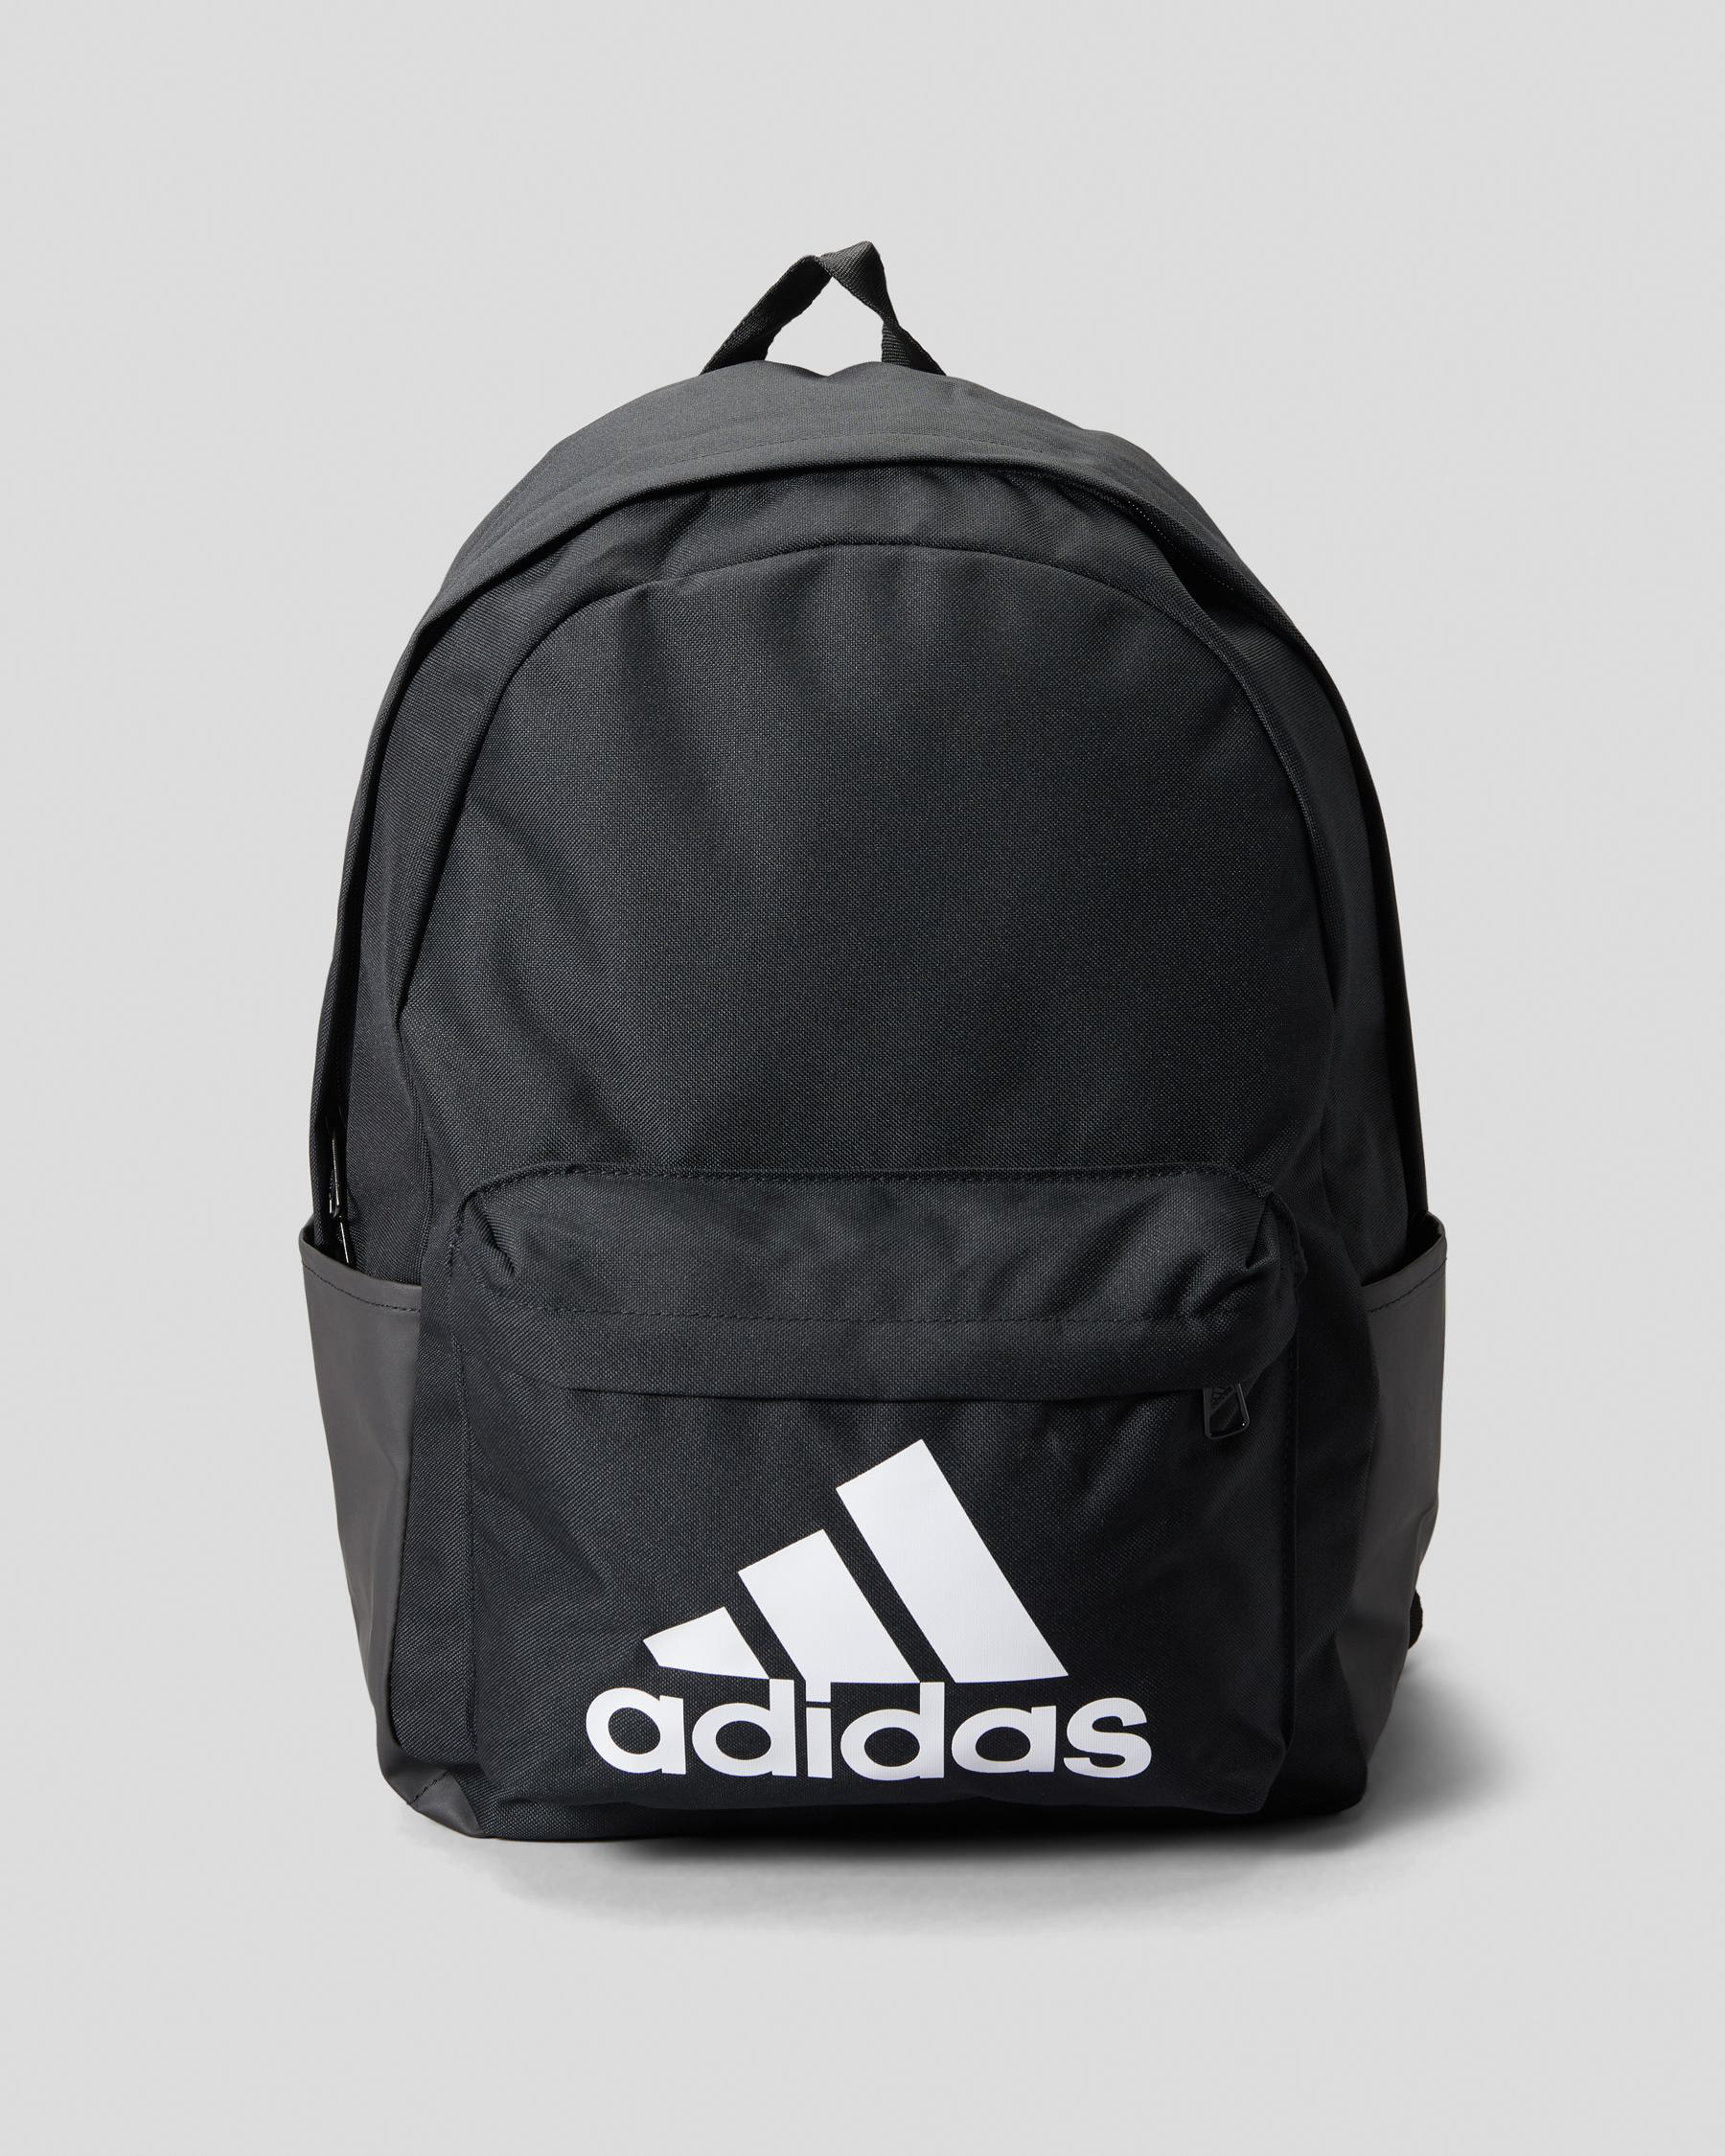 adidas Classic BOS Backpack In Black/white - FREE* Shipping & Easy ...